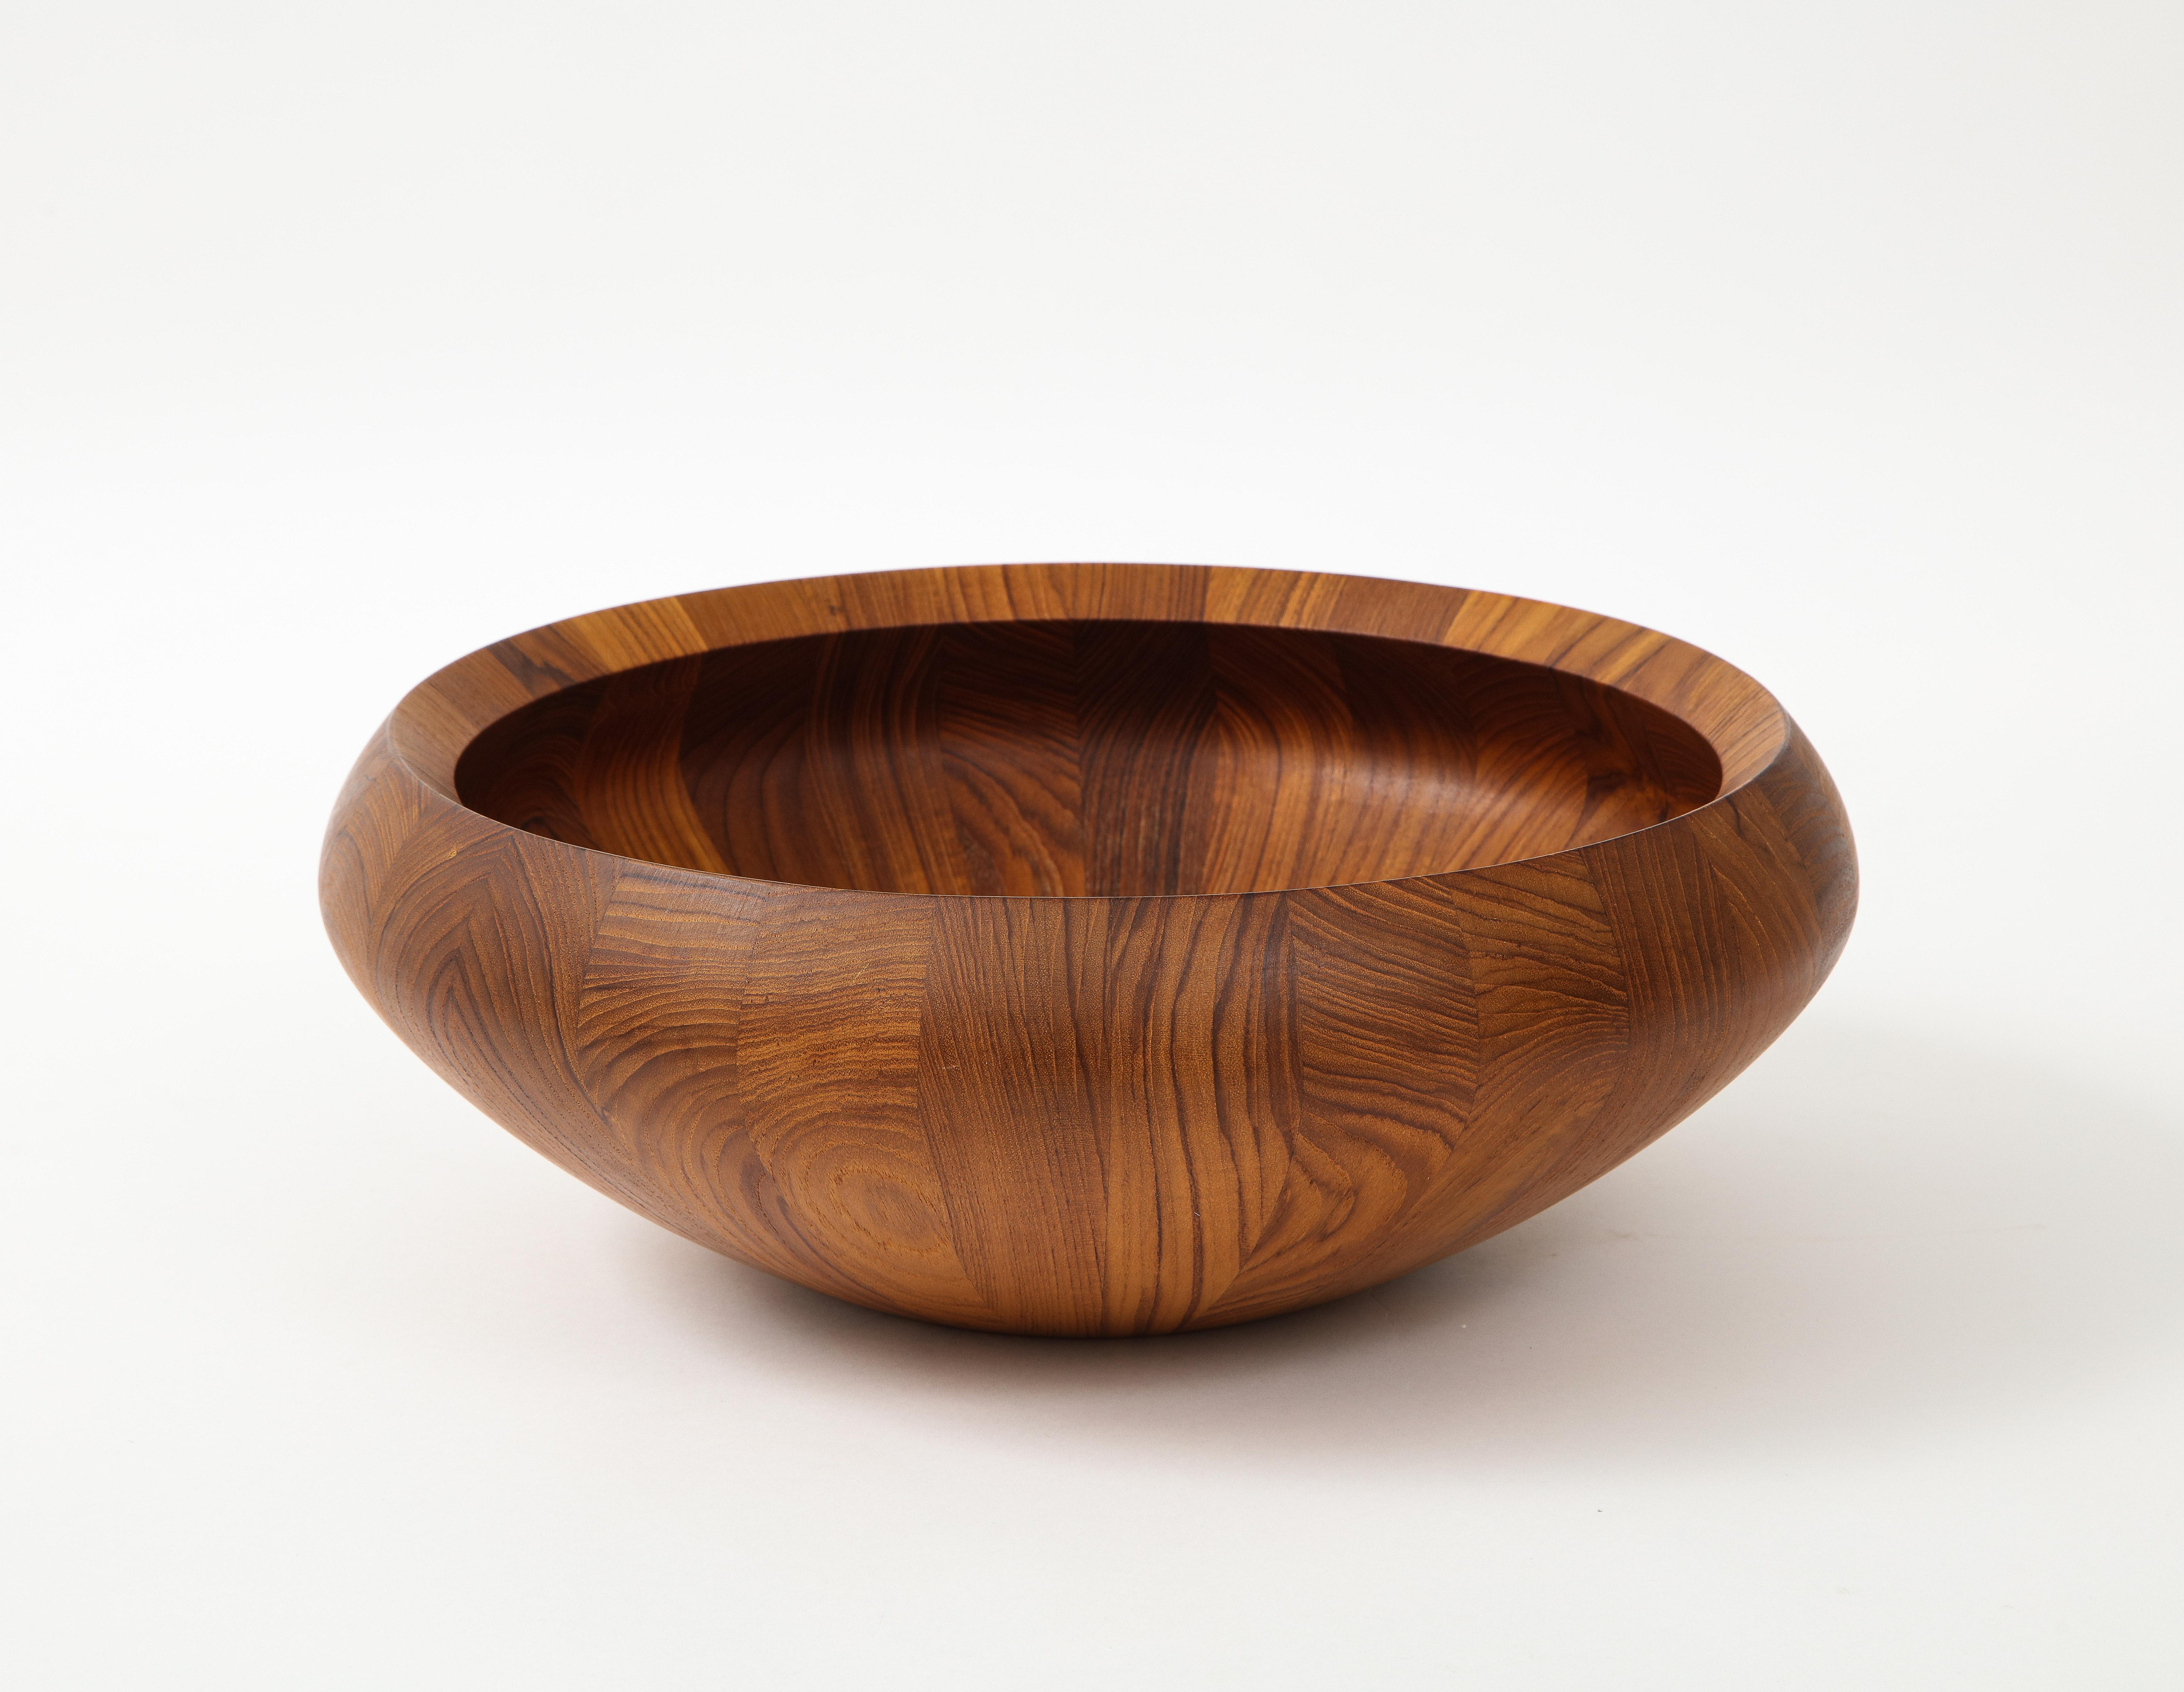 1960's Mid-Century Modern Jens Quistgaard designed for Dansk large teak salad bowl, in vintage original condition with minor wear and patina due to age and use.